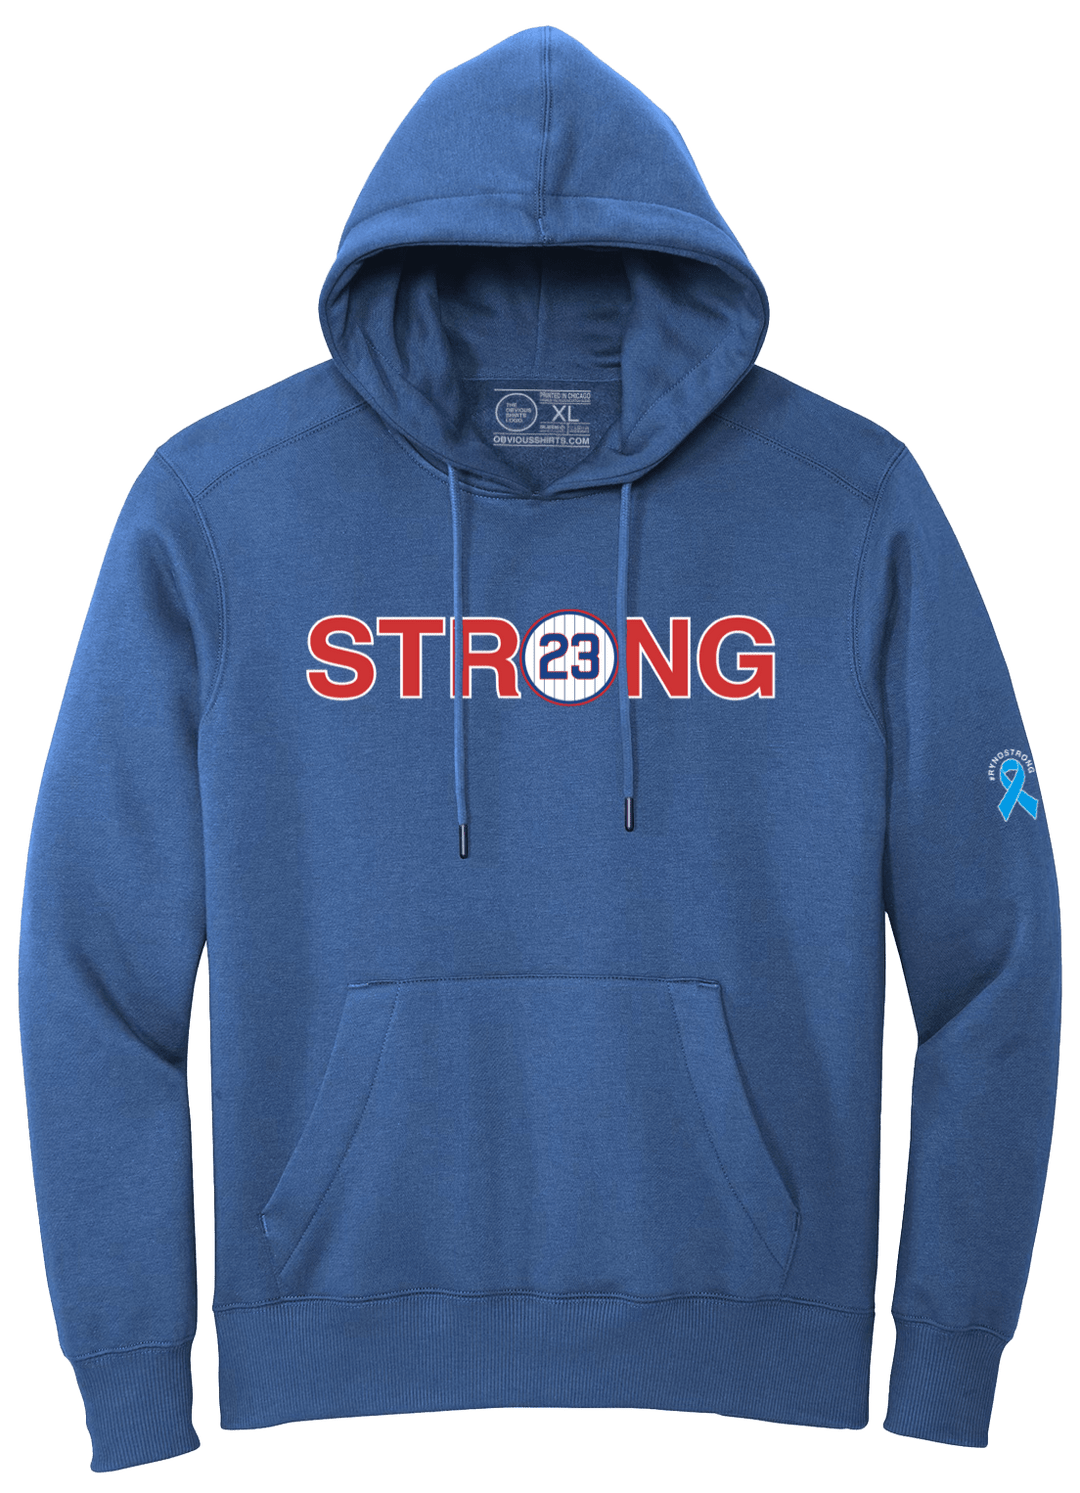 WE ARE ALL RYNO STRONG. (BLUE HOODED SWEATSHIRT) - OBVIOUS SHIRTS